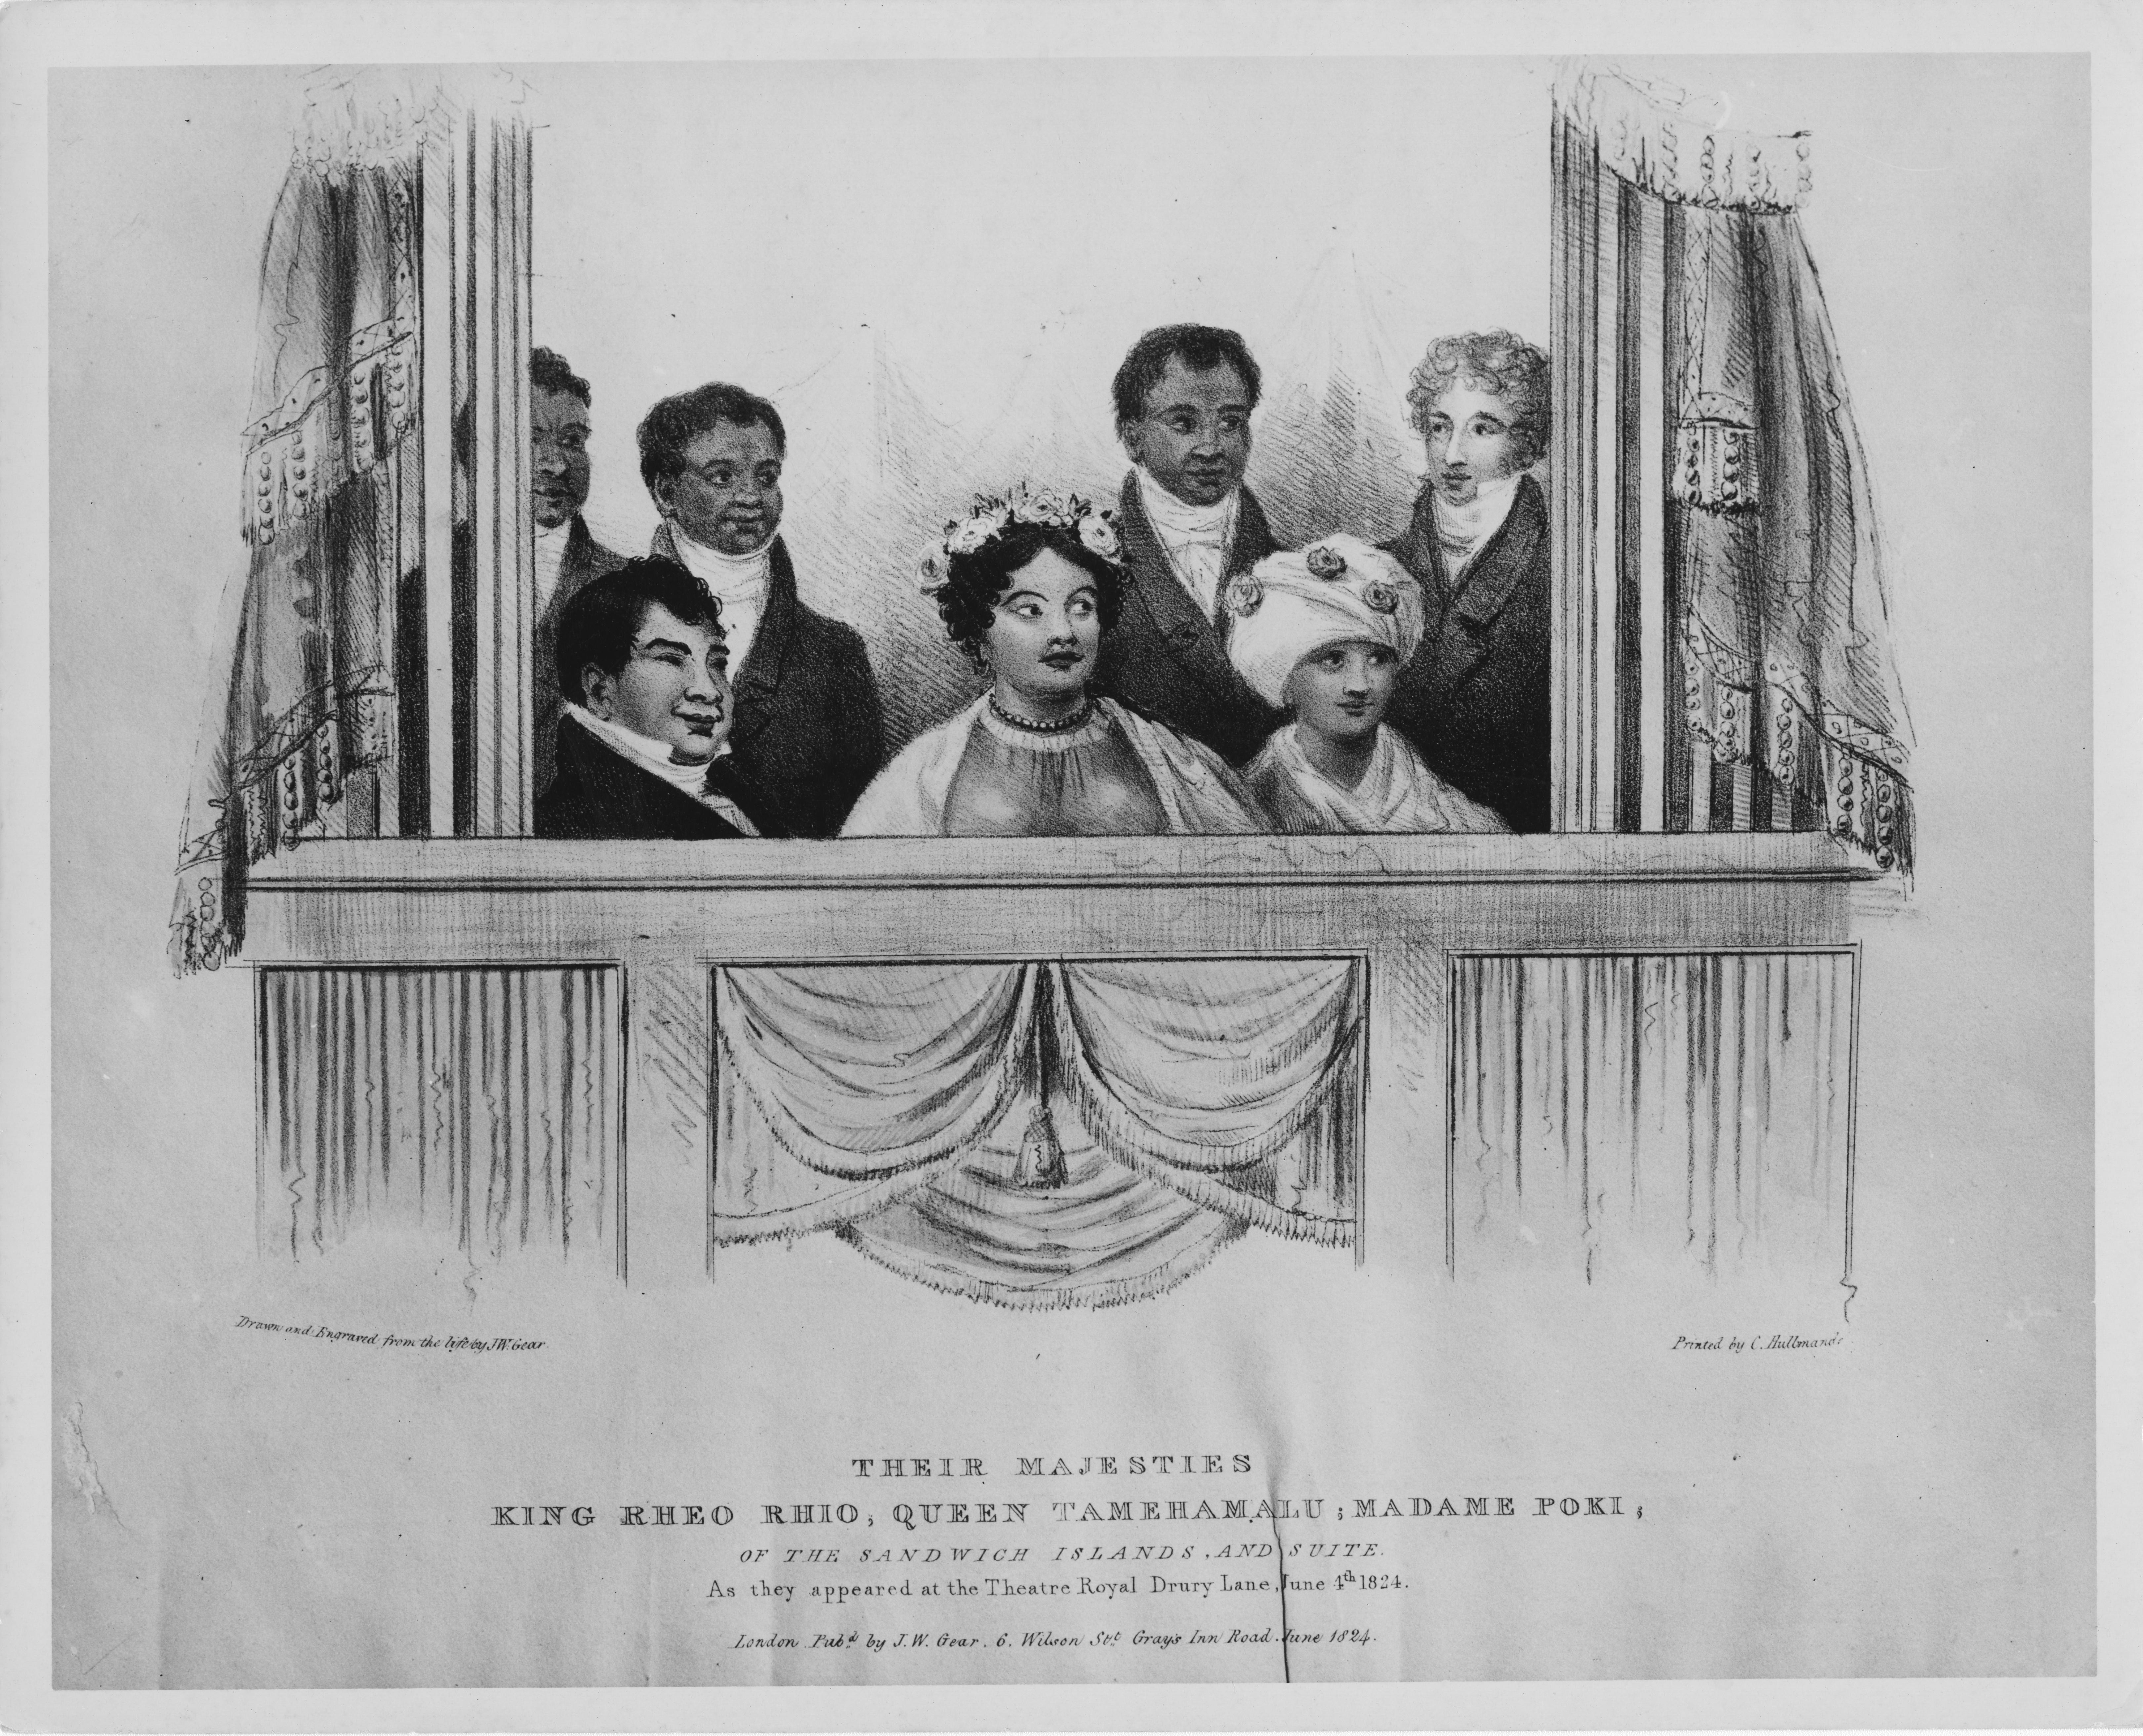 Black and white illustration of Hawaiian Aliʻi wearing Western clothing and sitting in a theater box. Text below the image reads: Their Majesties King Reho Rhio, Queen Tamehamalu, Madame Poki, of the Sandwich Islands, and Suite, As they appeared at the Theatre Royal Drury Lane June 4th 1824. London Pubd by J.W. Gear, 6, Wilson Stt Gray's Inn Road. June 1824. Drawn and Engraved from the life by JW Gear. Printed by C. Hullmande.